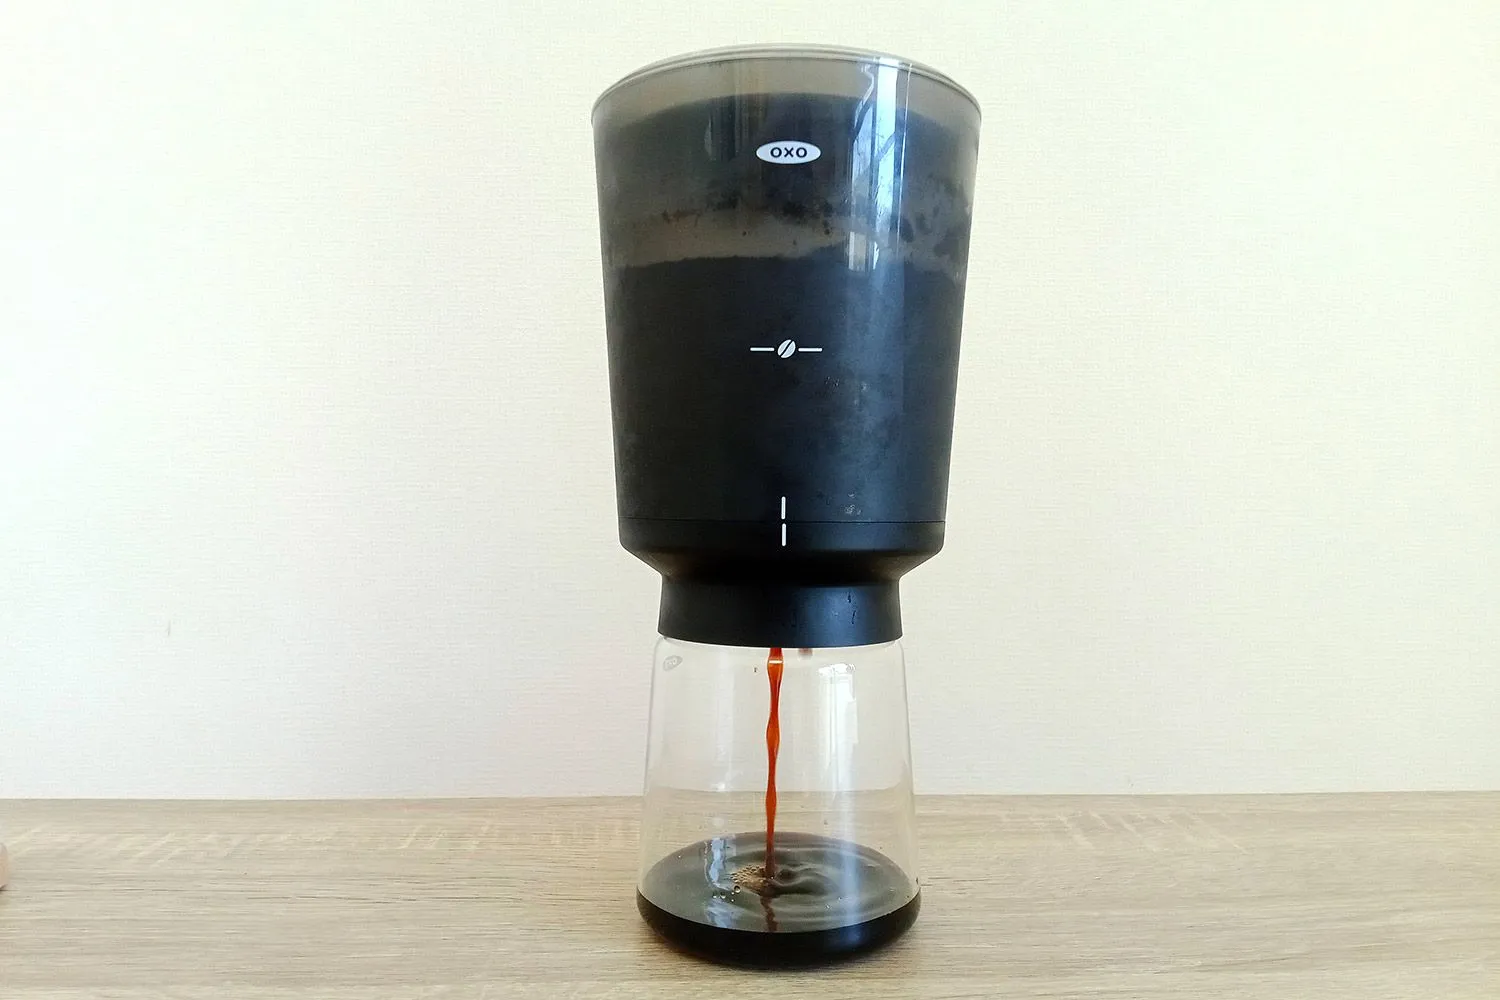 Oxo Cold Brew Maker Review - How to Make Cold Brew Coffee